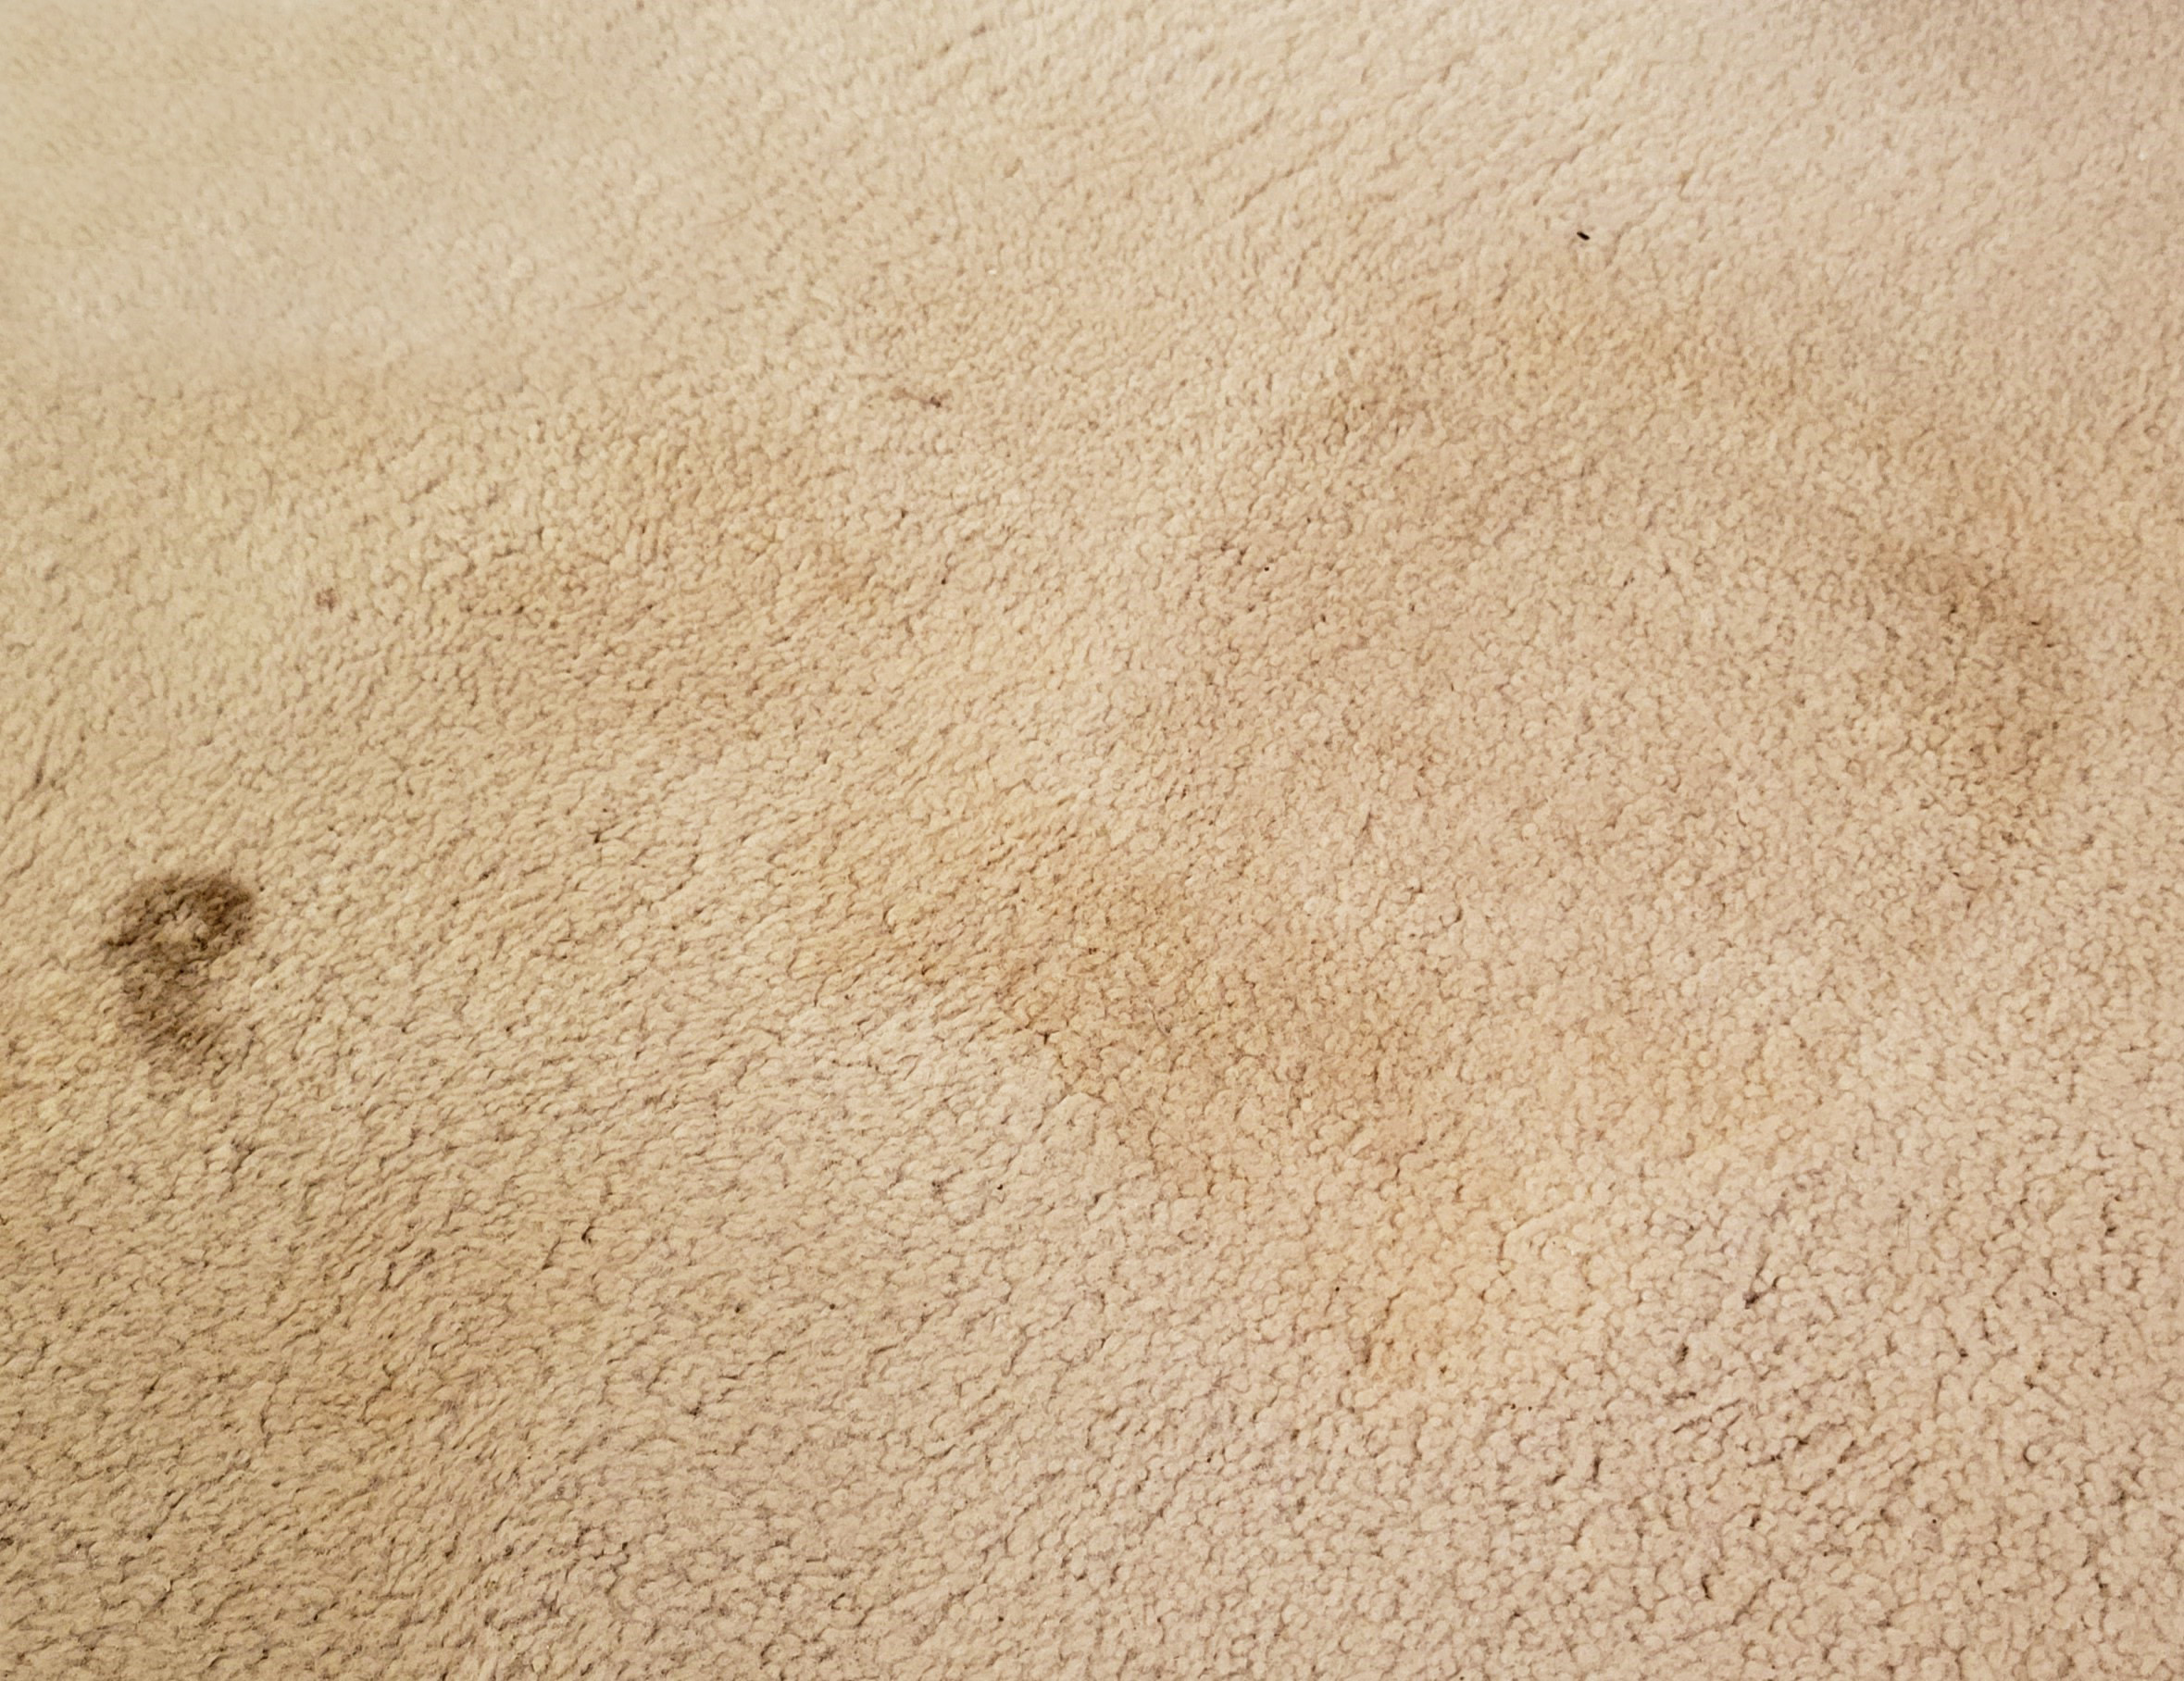 Professional Carpet Cleaning Bloomingdale Illinois